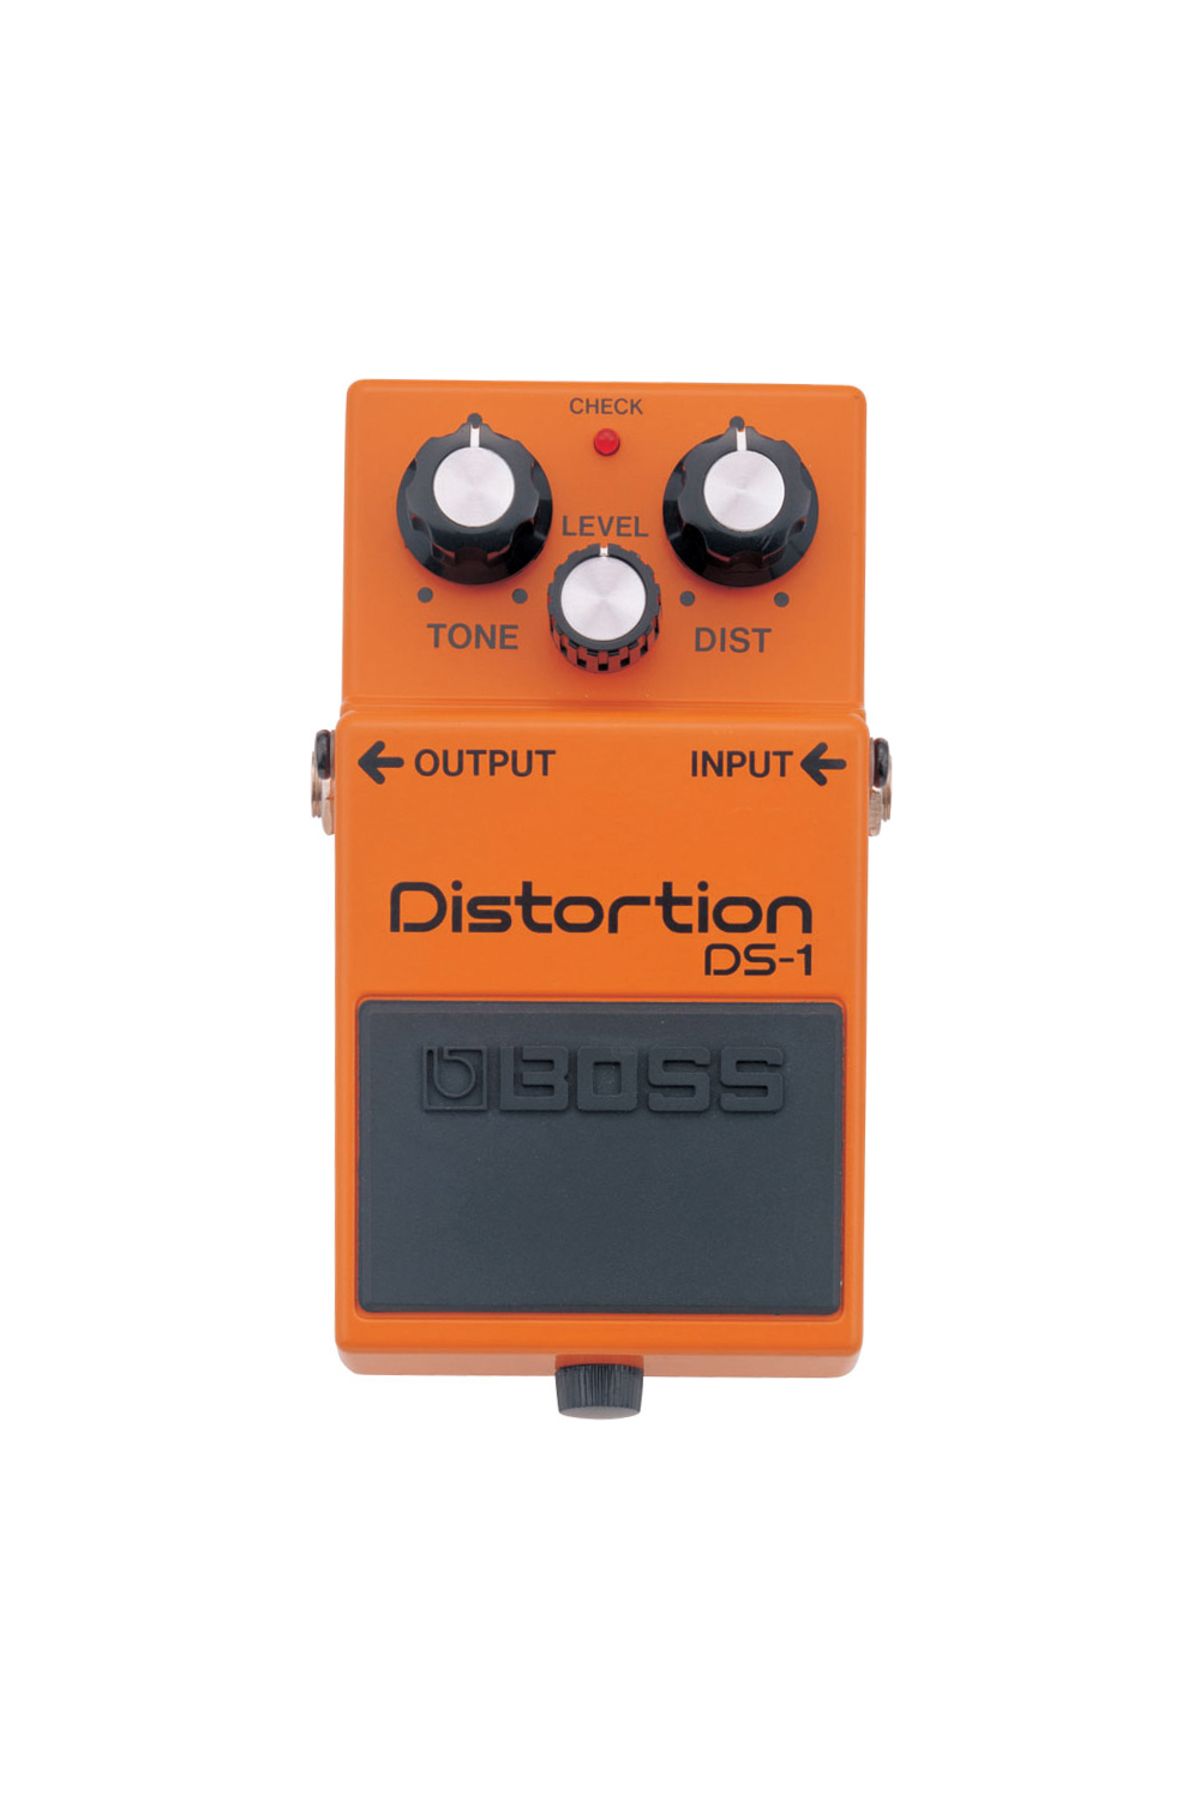 BOSS Ds-1 Distortion Compact Pedal